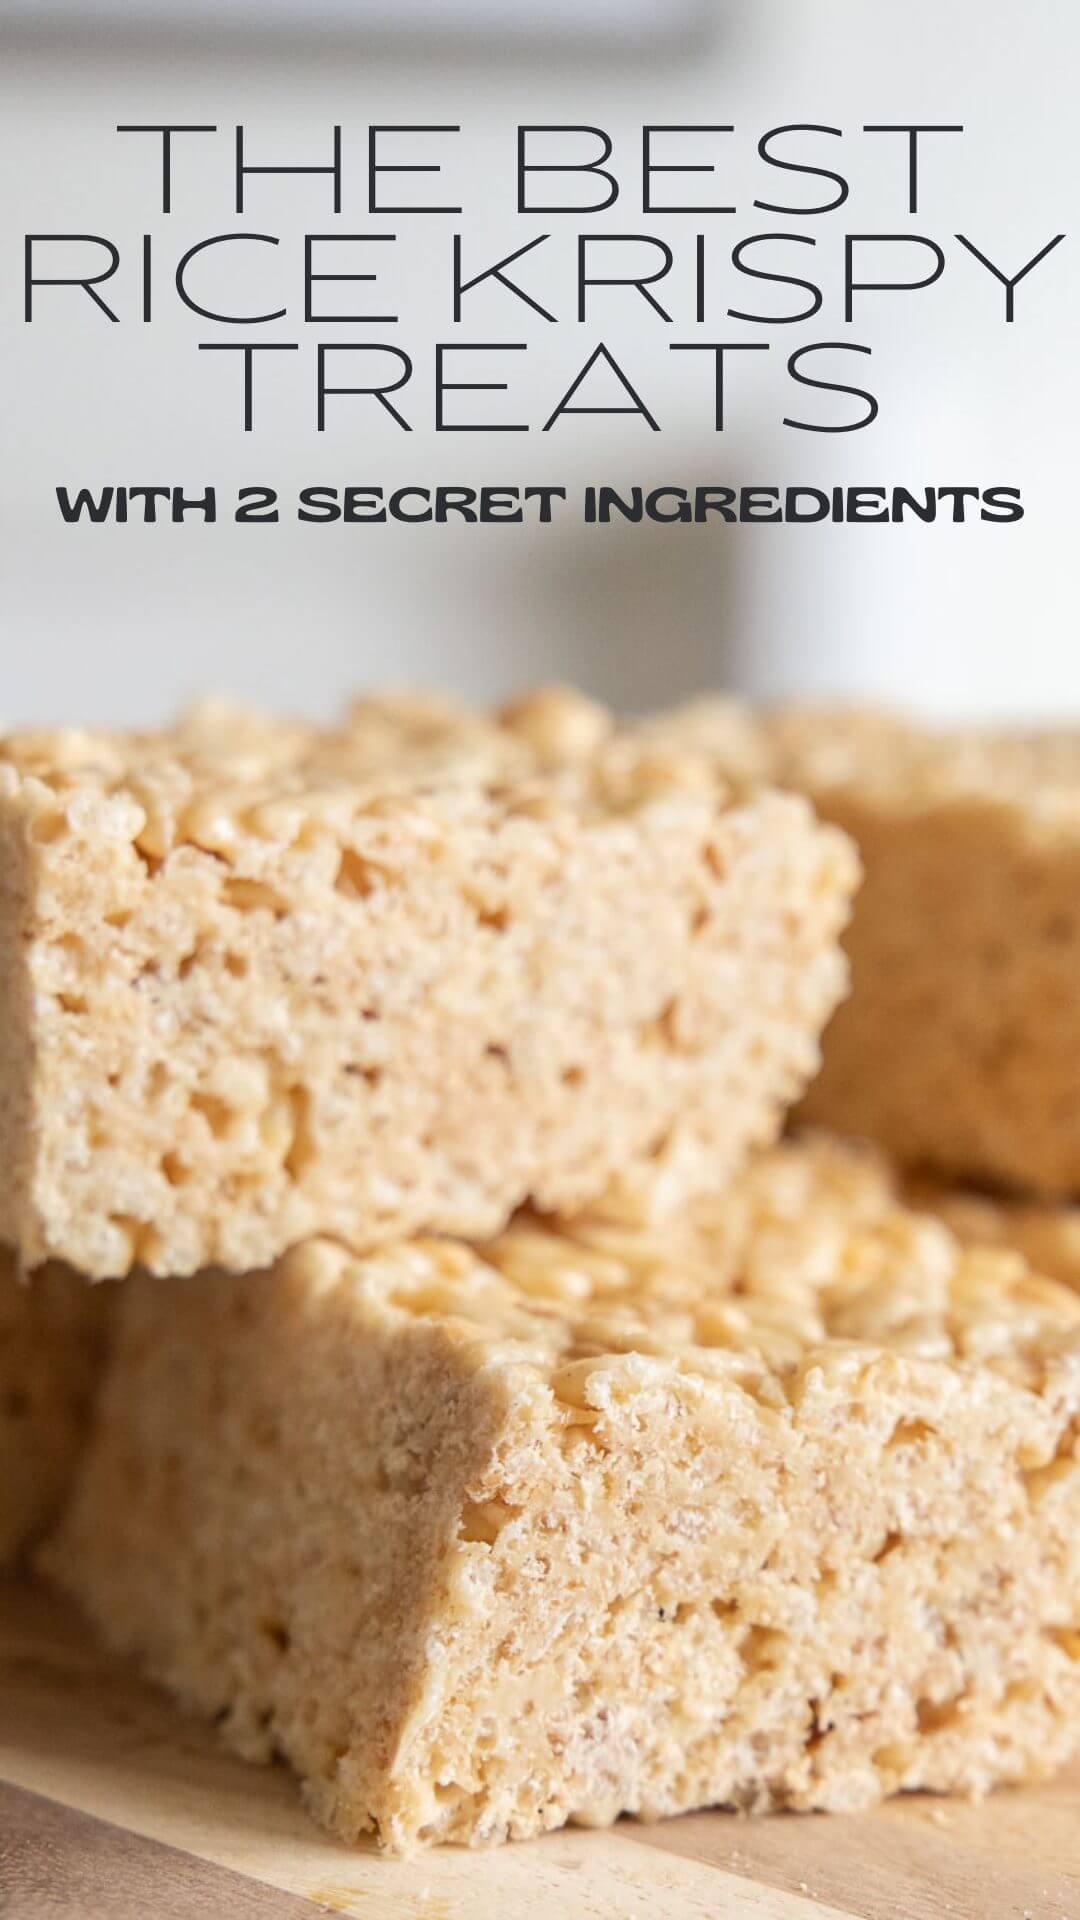  These are the ultimate rice crispy treats! With a couple ingredients you wouldn't think of, they make regular rice krispy treats more delectable and elevate a simple treat!